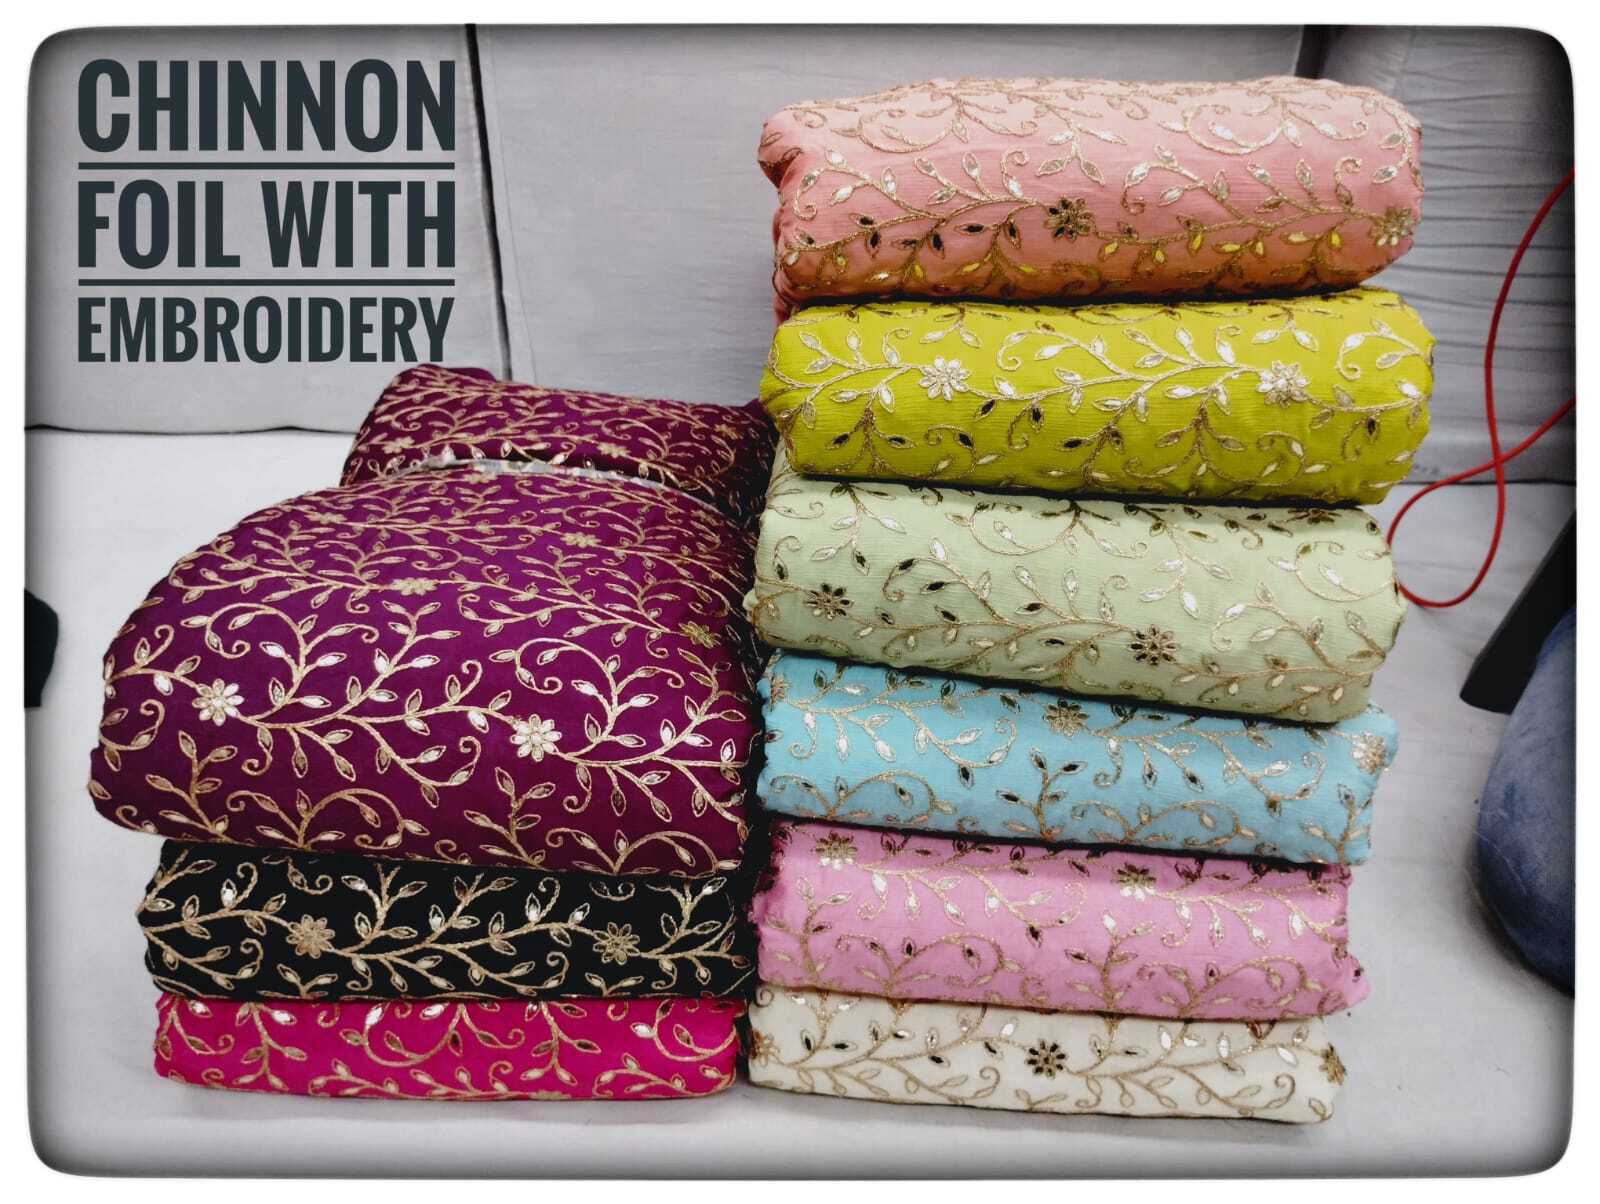 pure chinnon foil with embroidery